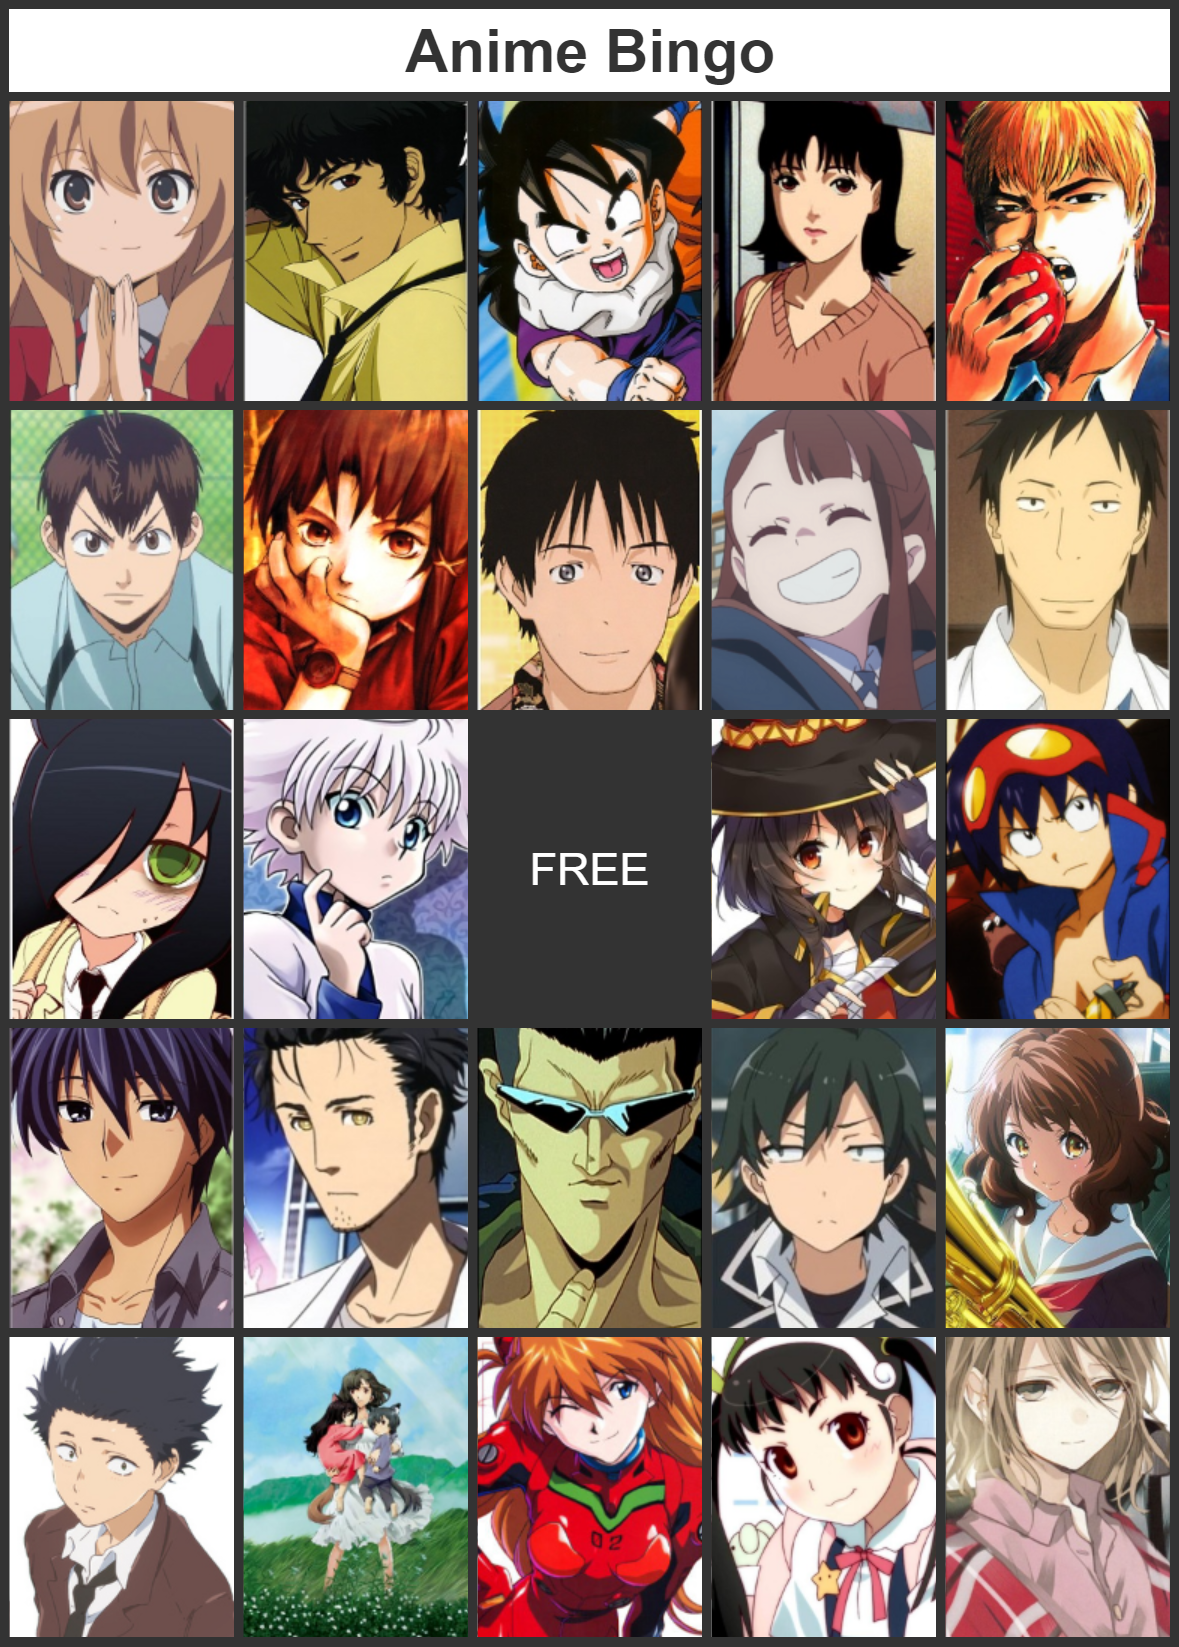 My Anime Character Bingo by miketastic5 on DeviantArt